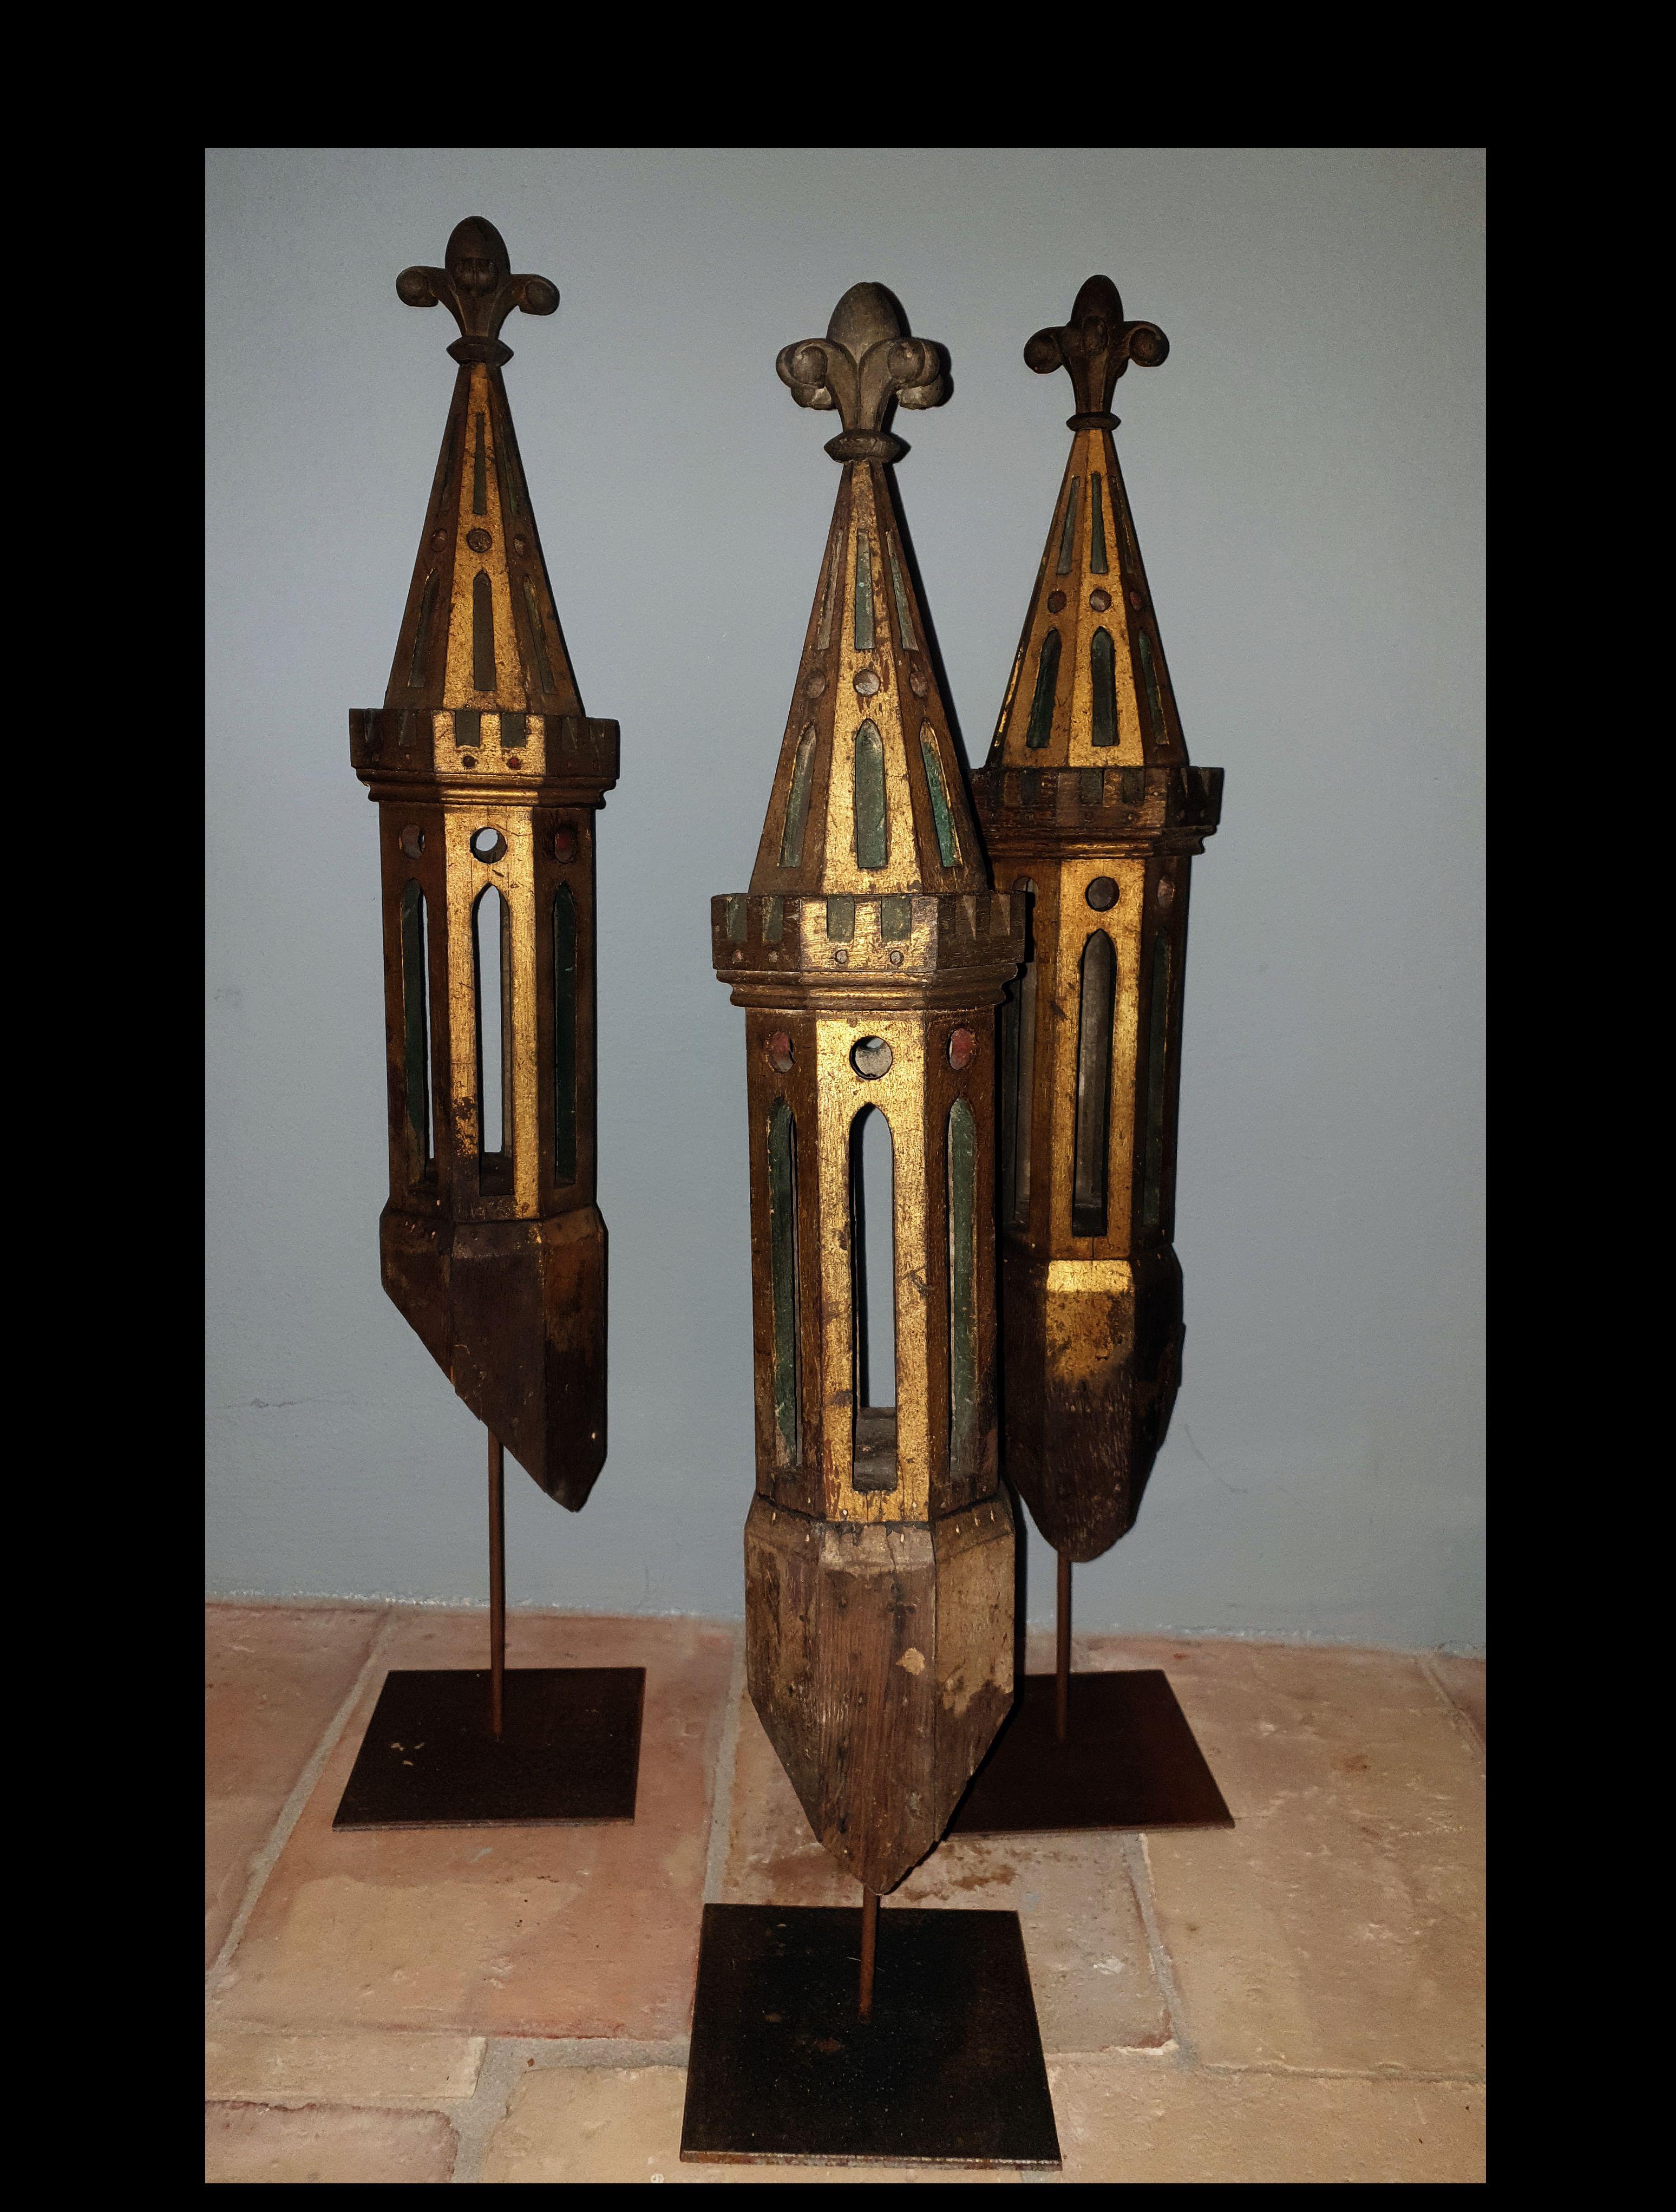 Set of three Gothic style church tower parts from a huge architectural model. Wood gilt. Each tower top on a ne fabricated stand, Germany, mid-19th century.
 